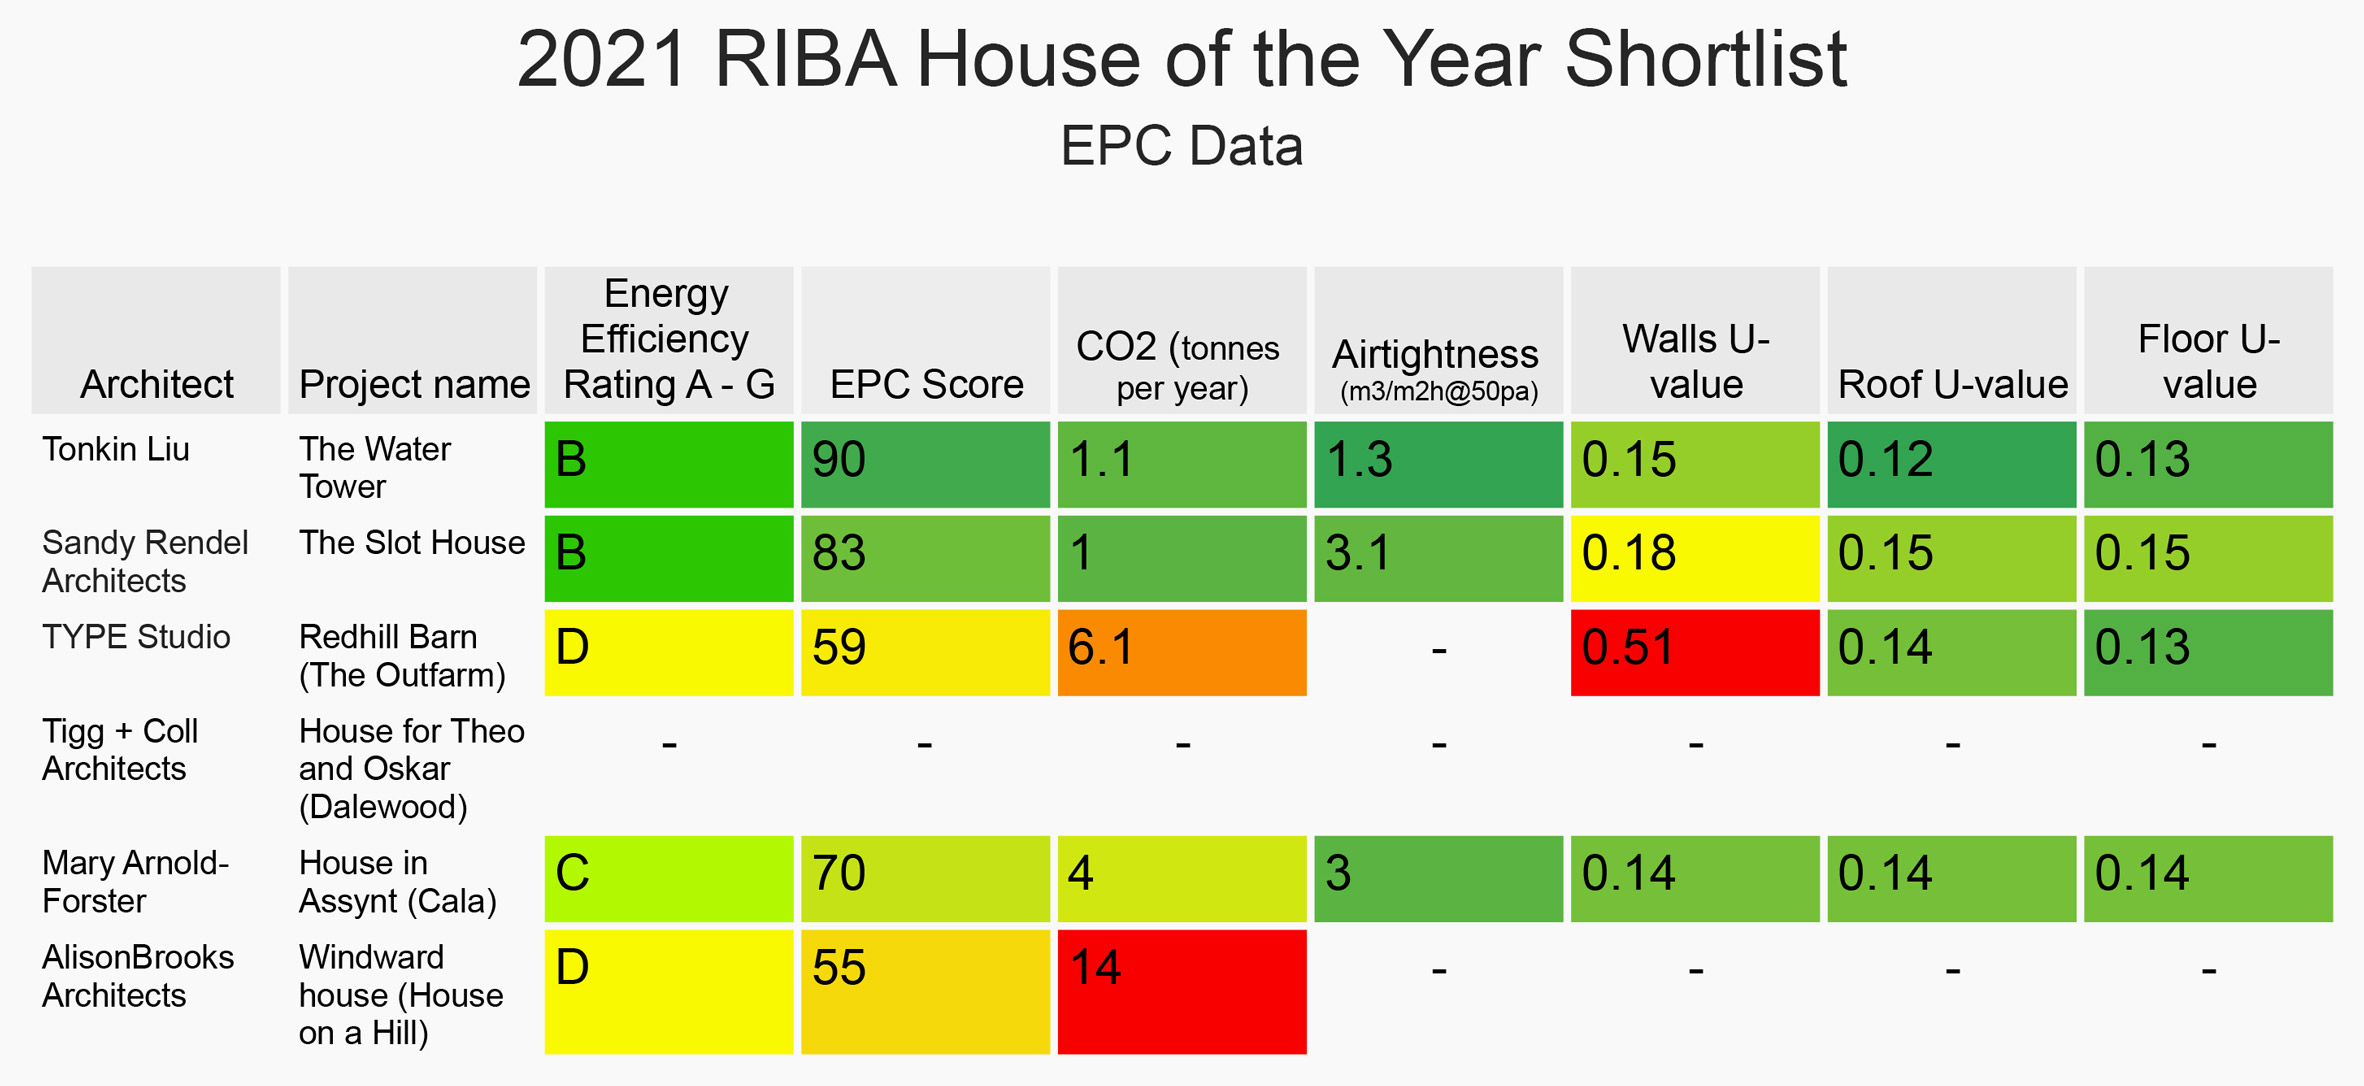 EPC ratings of RIBA House of the Year 2021 shortlist